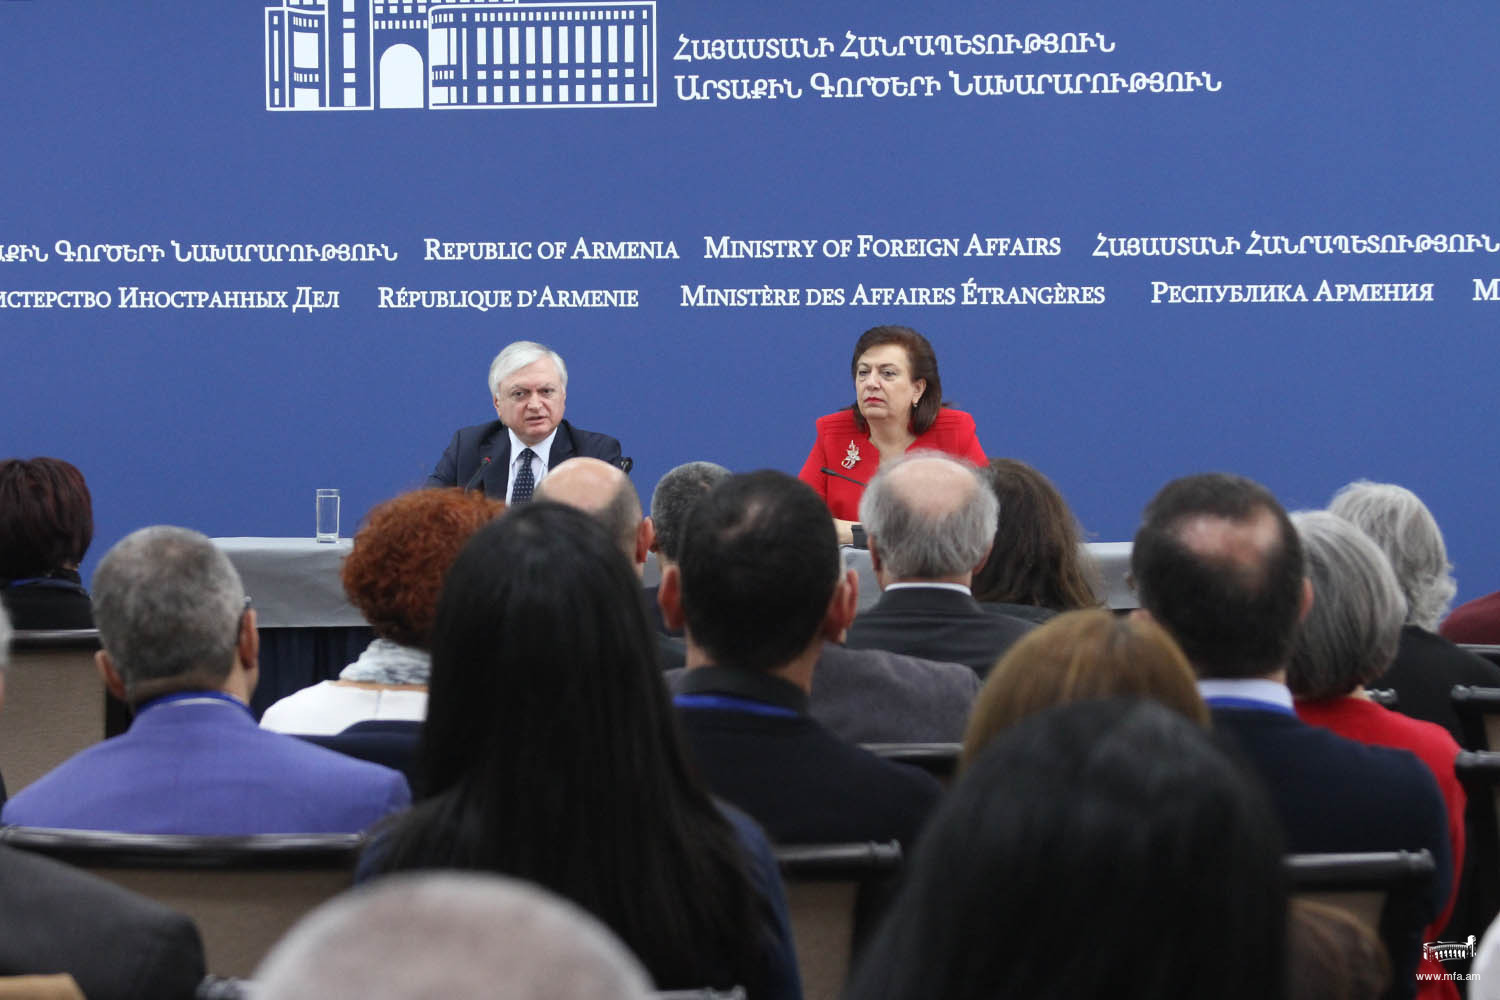 Edward Nalbandian received the participants of the 8th Pan-Armenian Forum of Journalists